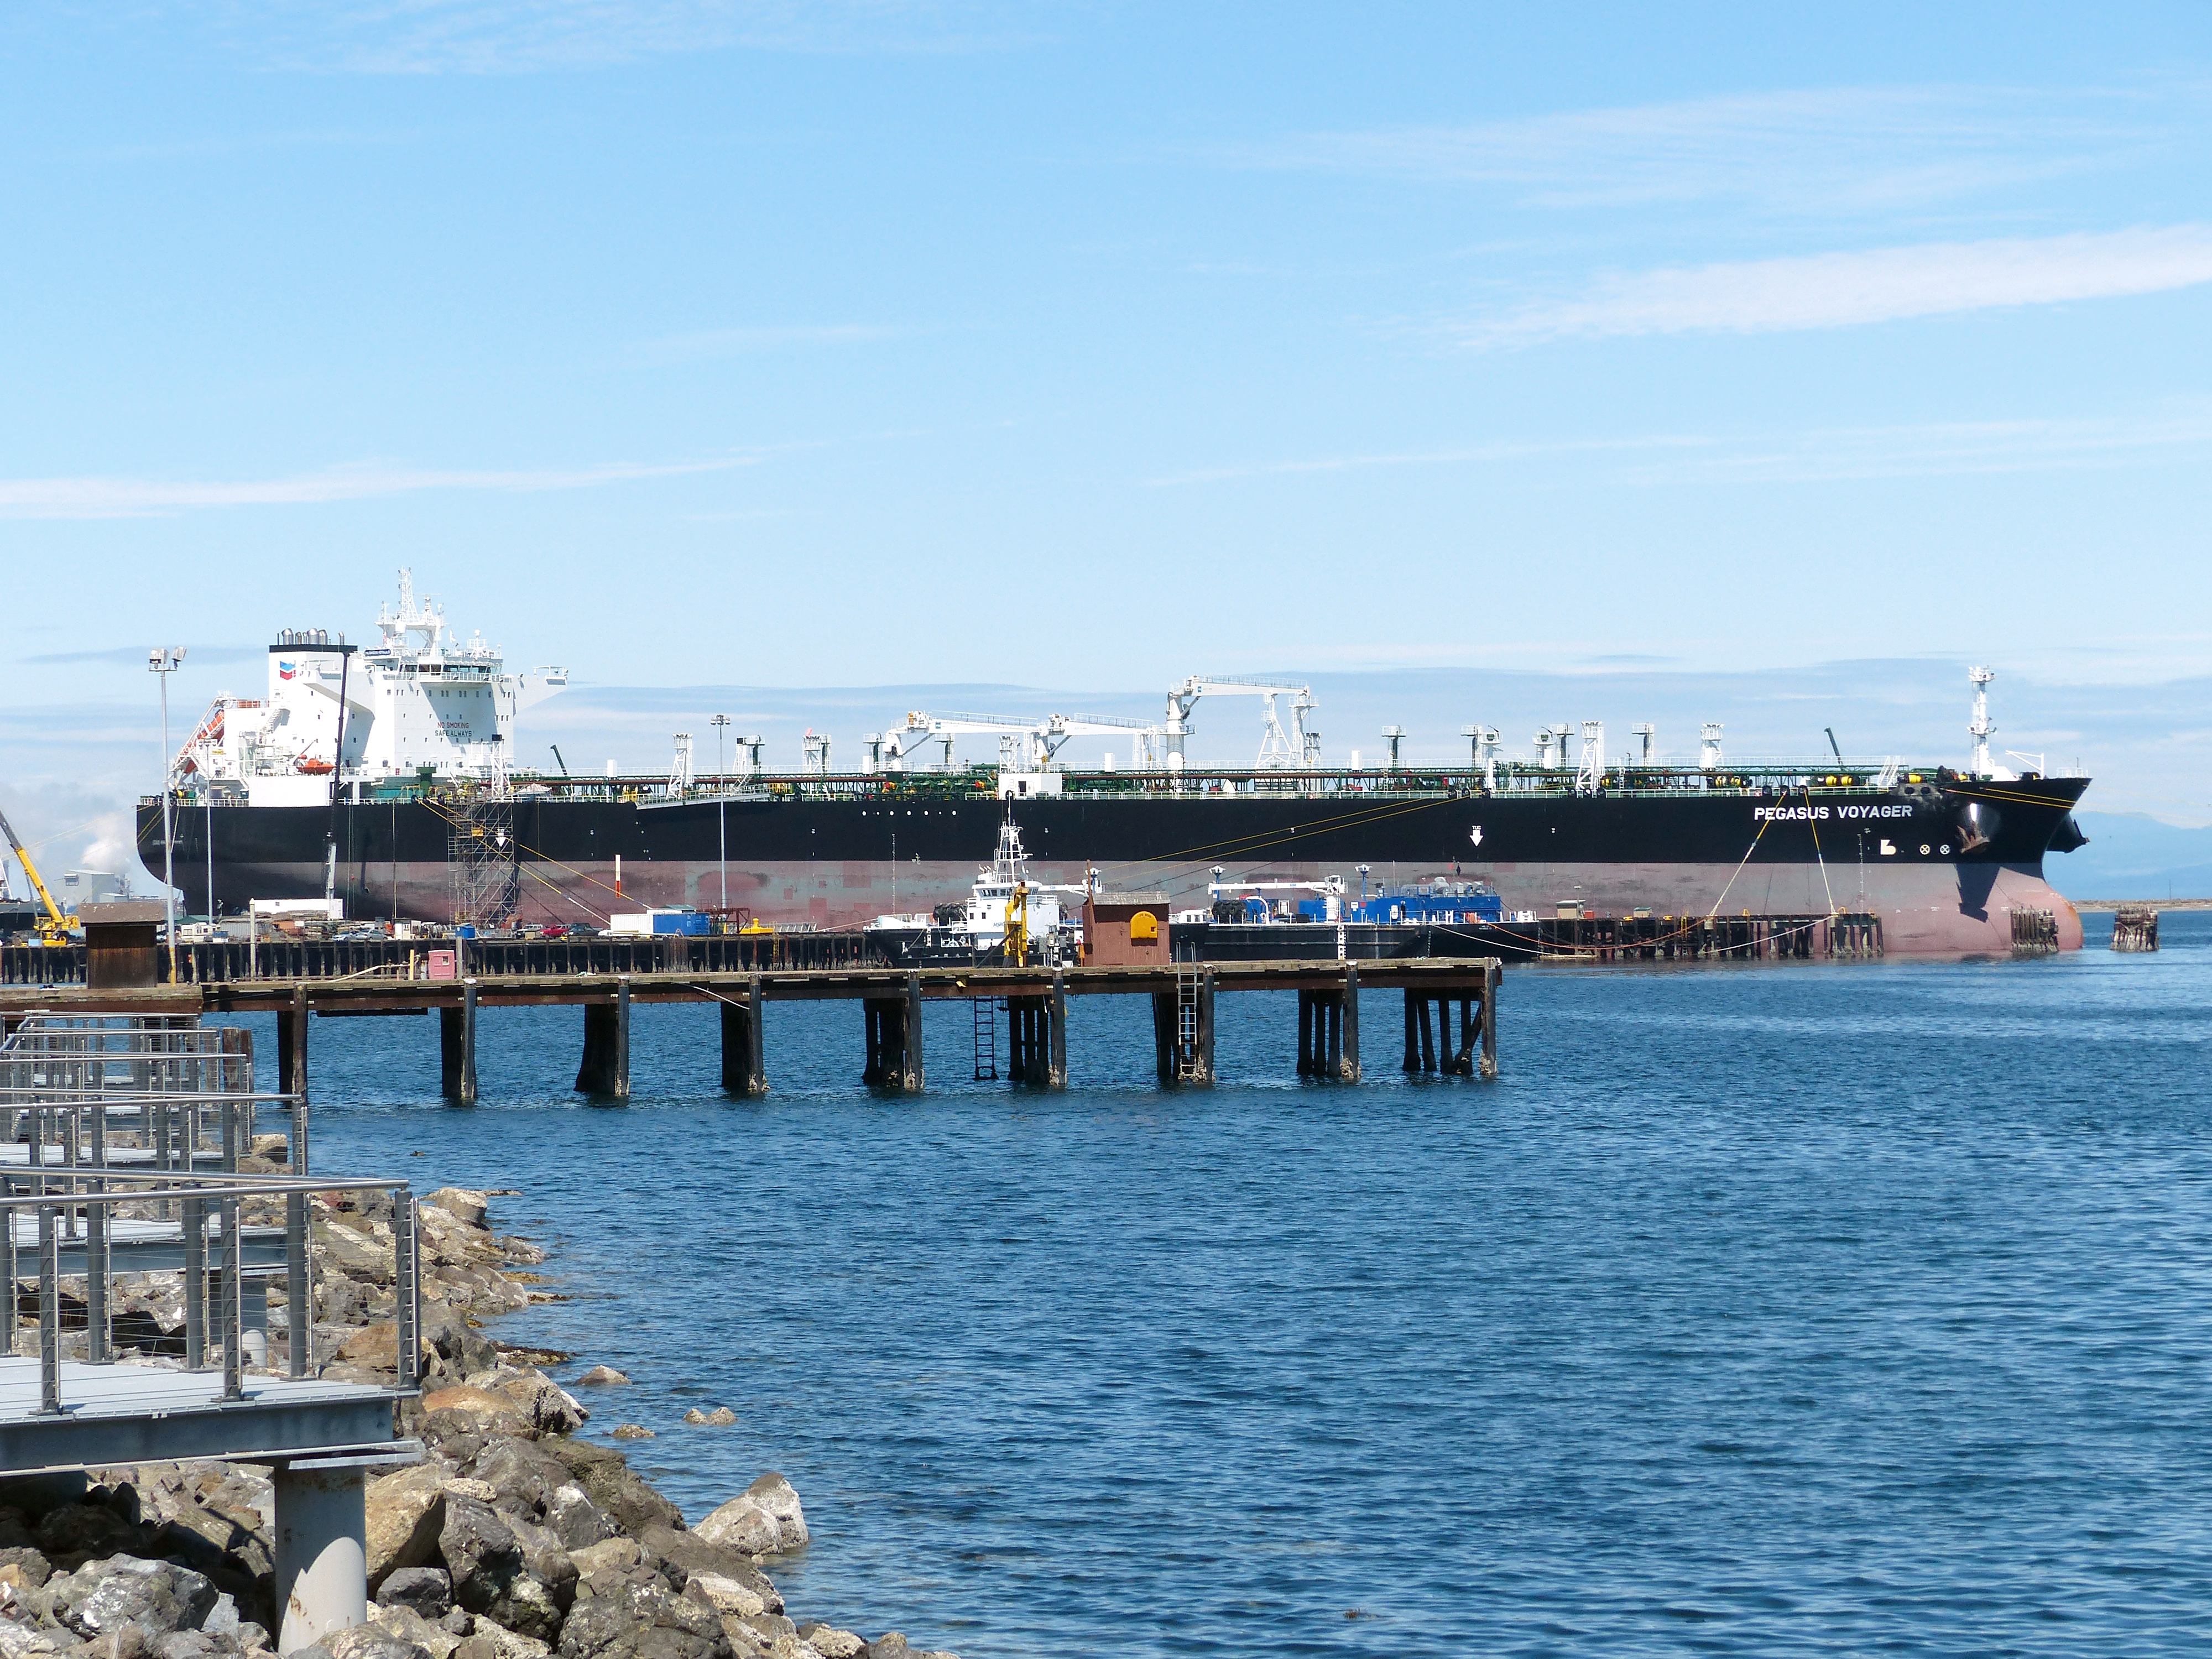 Chevron's Pegasus Voyager is tied up at the Port of Port Angeles' Terminal 1 North. (David G. Sellars/for Peninsula Daily News)